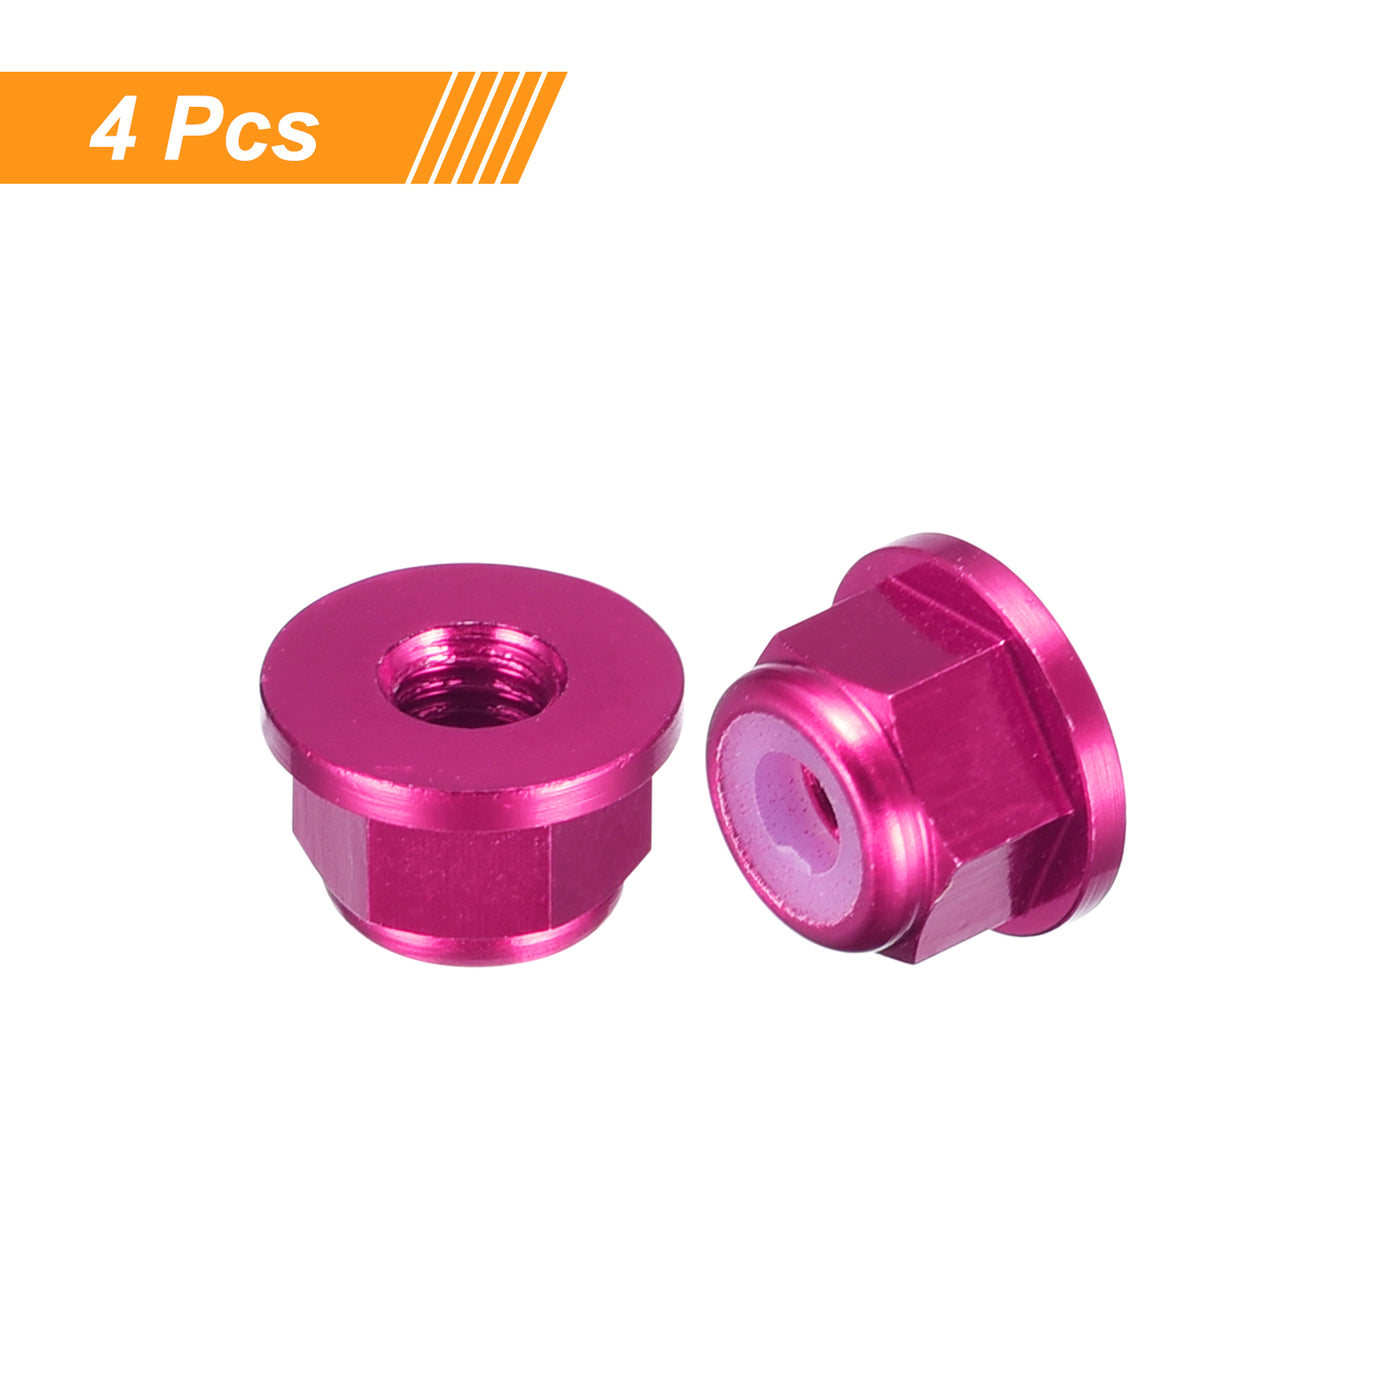 uxcell Uxcell Nylon Insert Hex Lock Nuts, 4pcs - M3 x 0.5mm Aluminum Alloy Self-Locking Nut, Anodizing Flange Lock Nut for Fasteners (Pink)